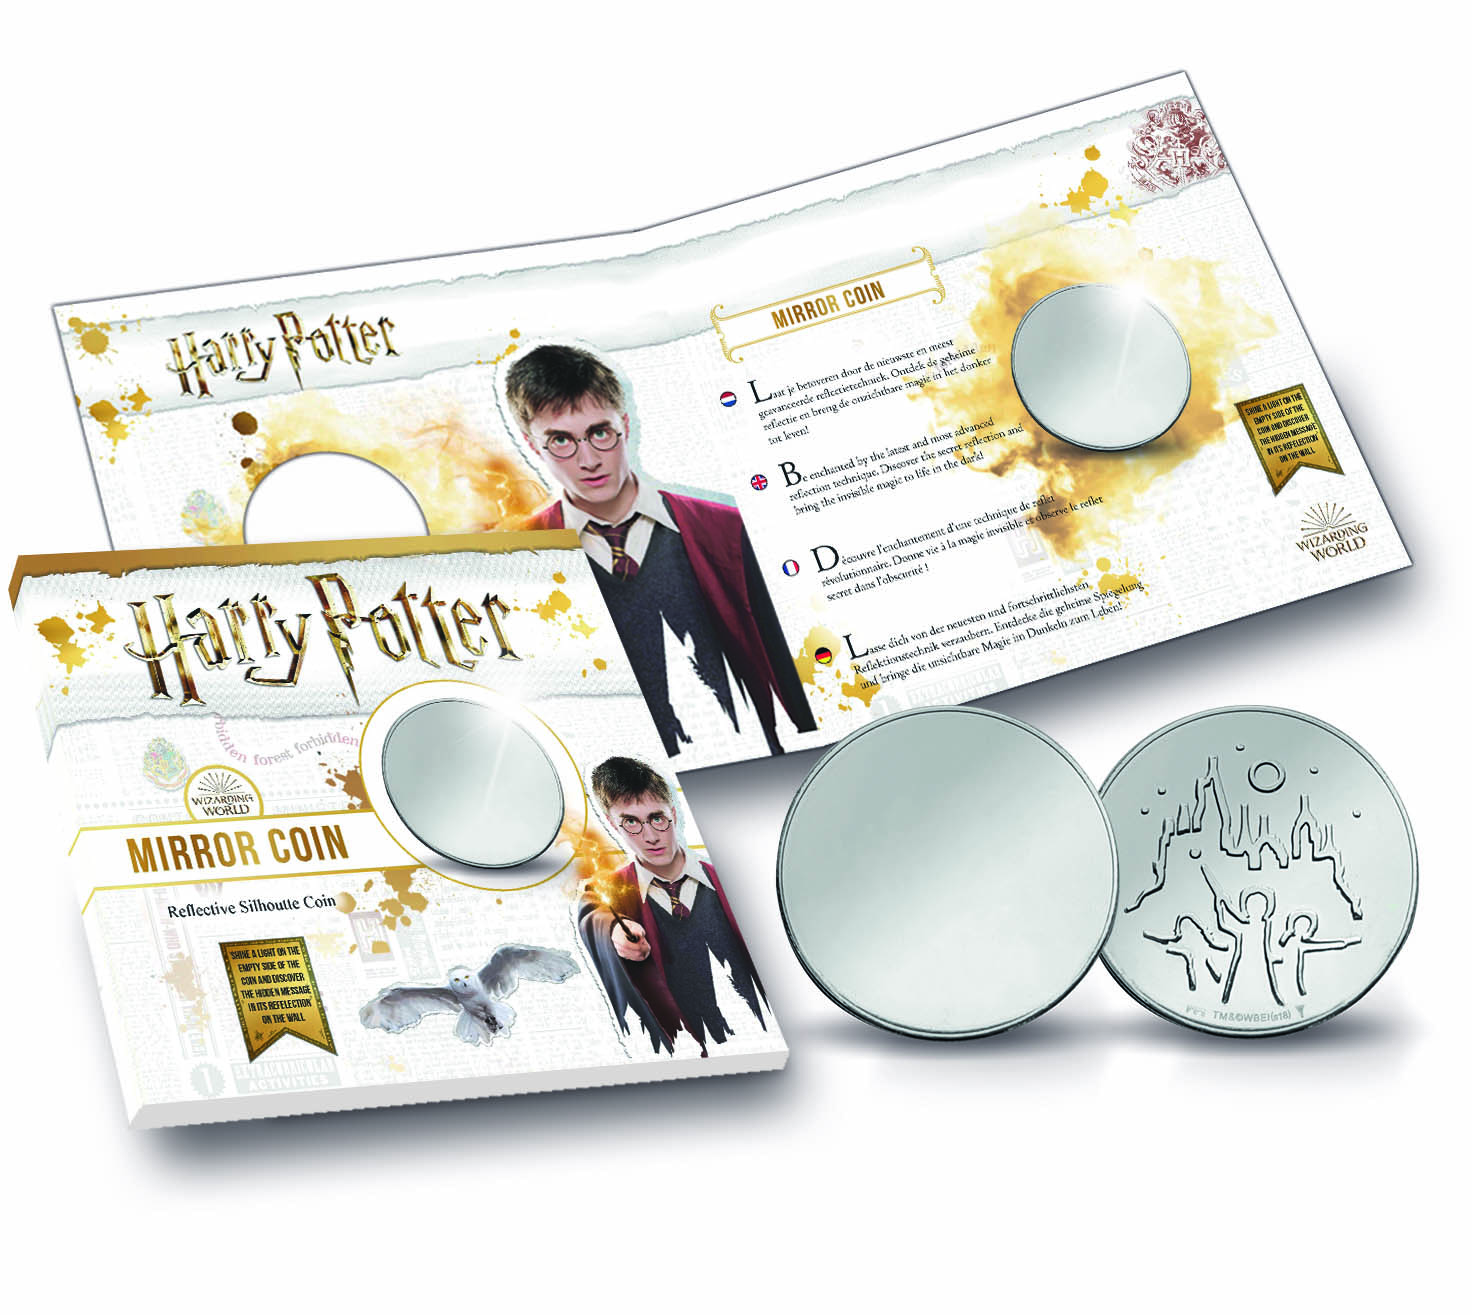 Harry Potter Mirror Coin